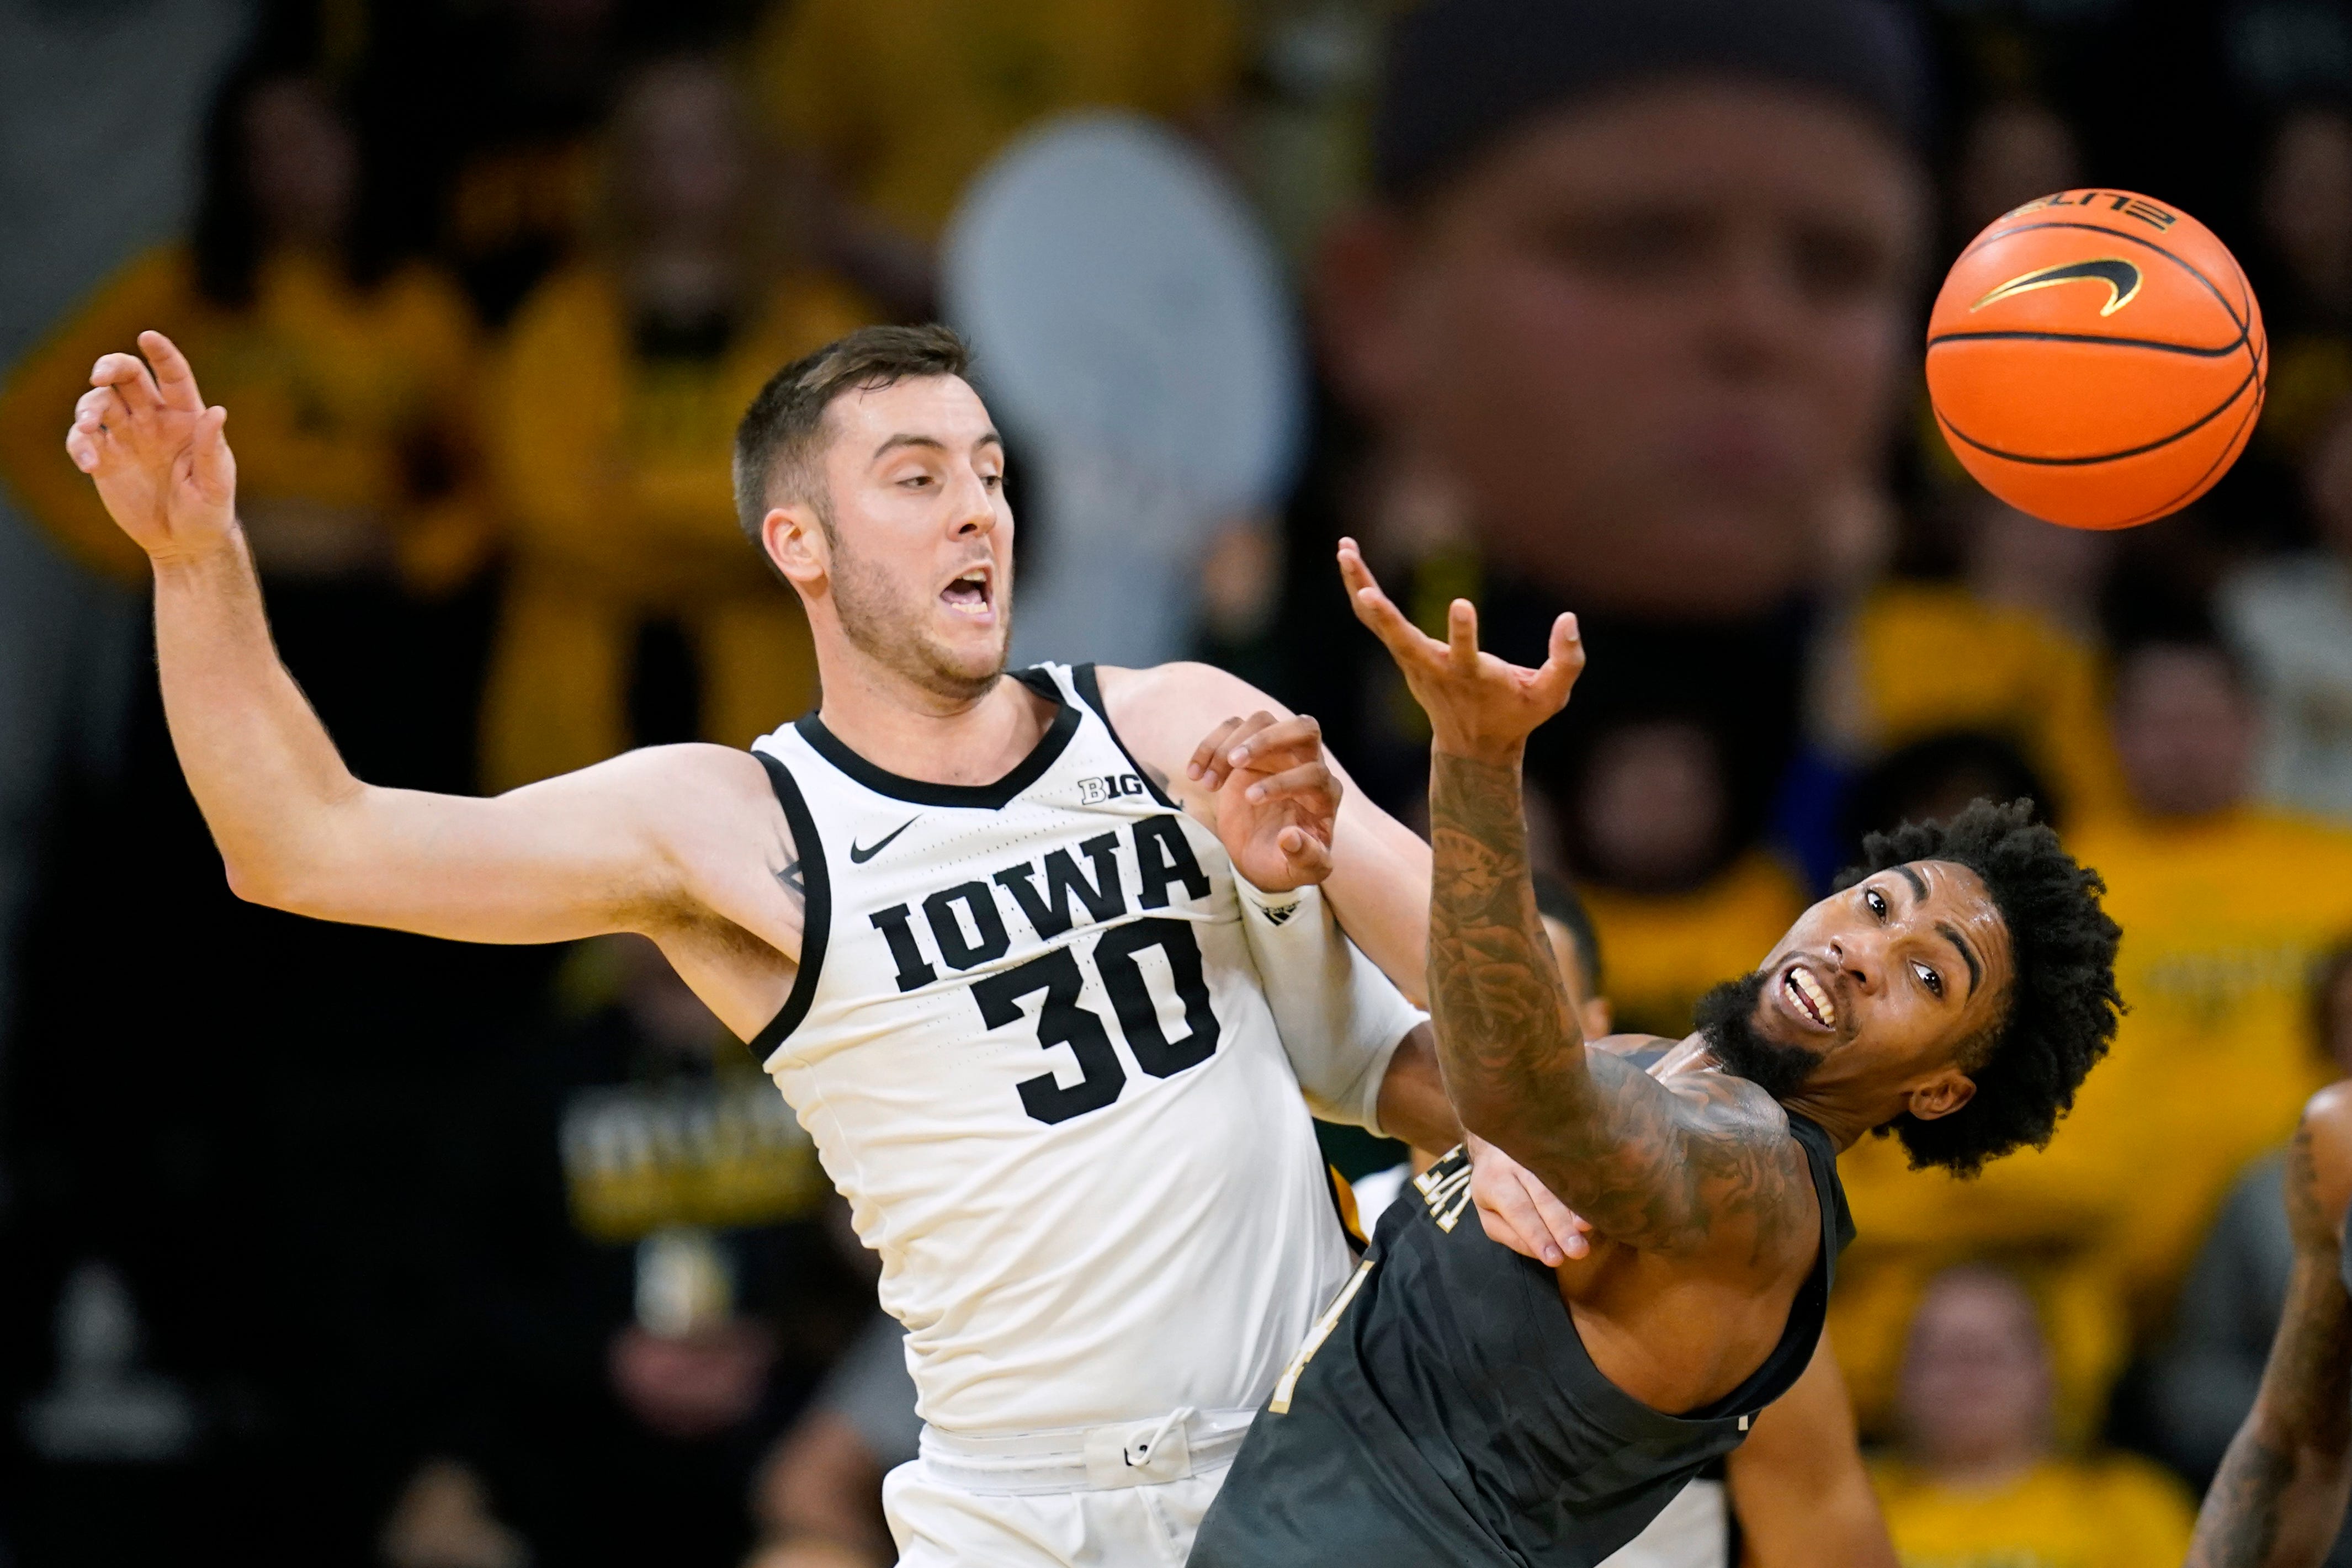 Iowa guard Connor McCaffery (30) fights for a loose ball with Georgia Tech forward Ja'von Franklin during the second half of an NCAA college basketball game, Tuesday, Nov. 29, 2022, in Iowa City, Iowa.